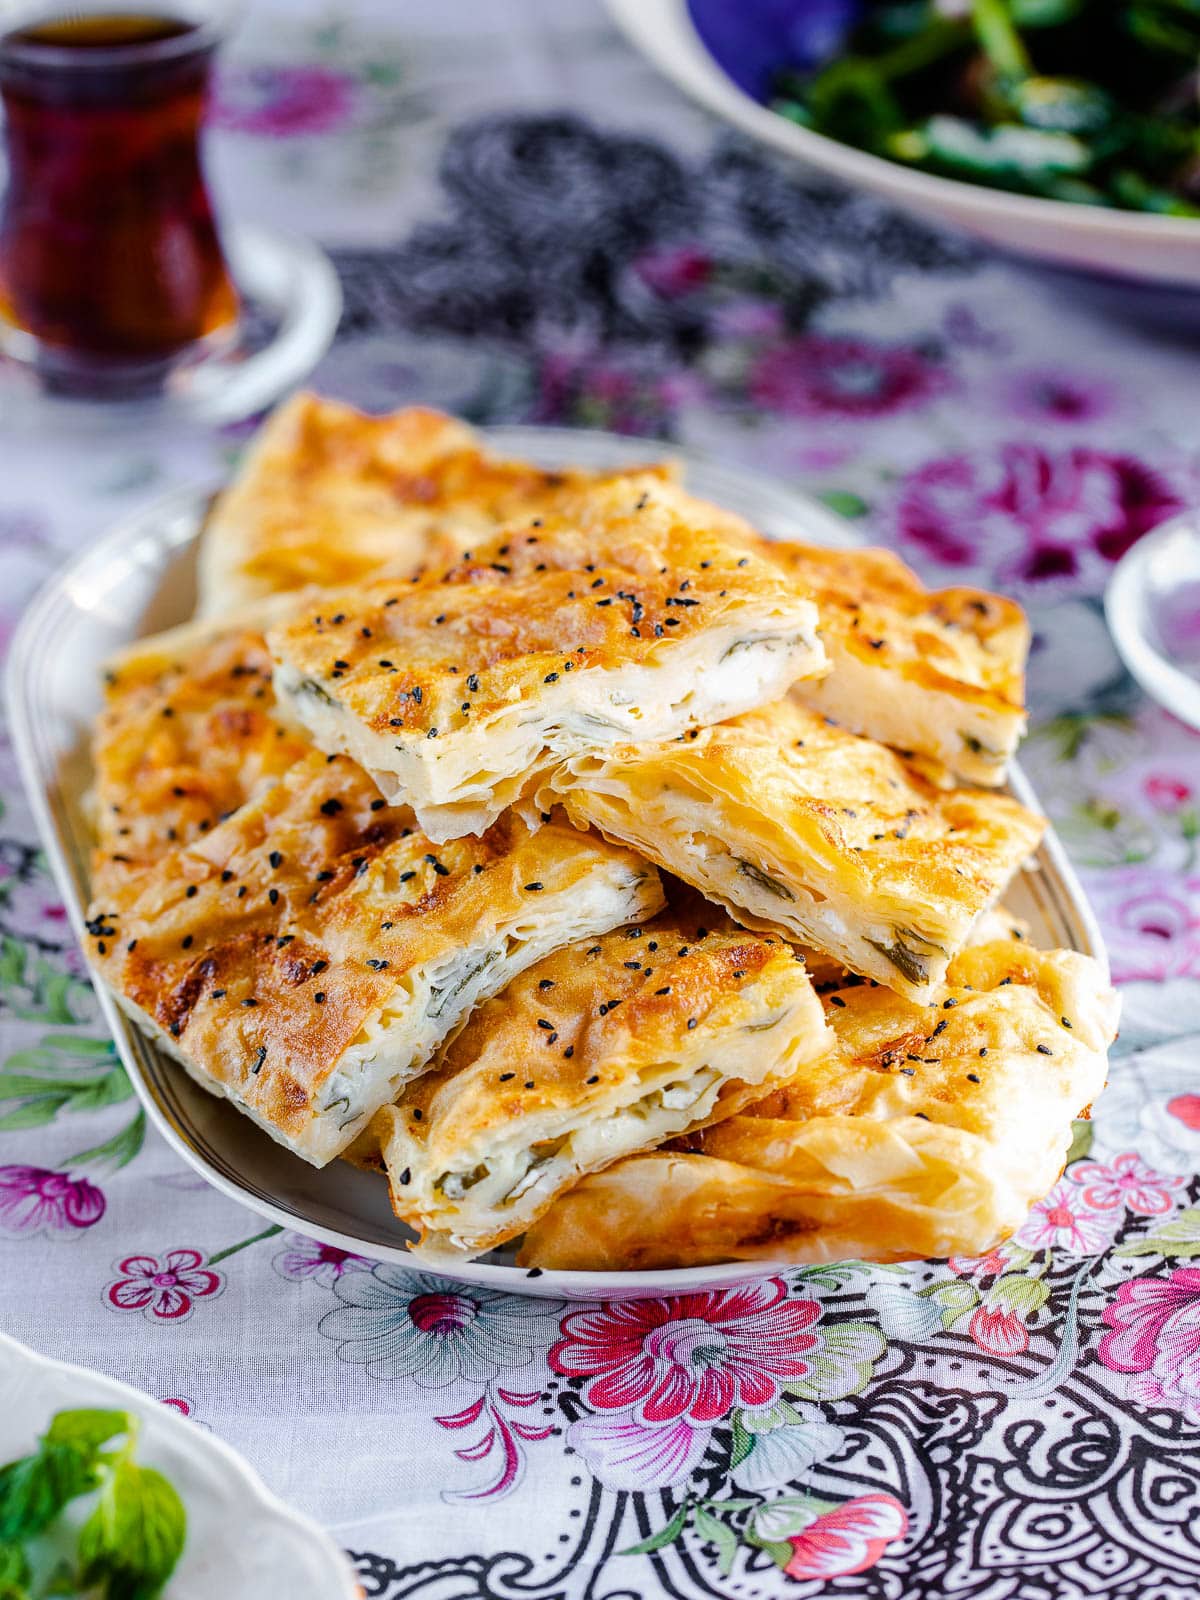 Plate stacked with Turkish tray börek on a rose patterned table cloth, seen from eye level